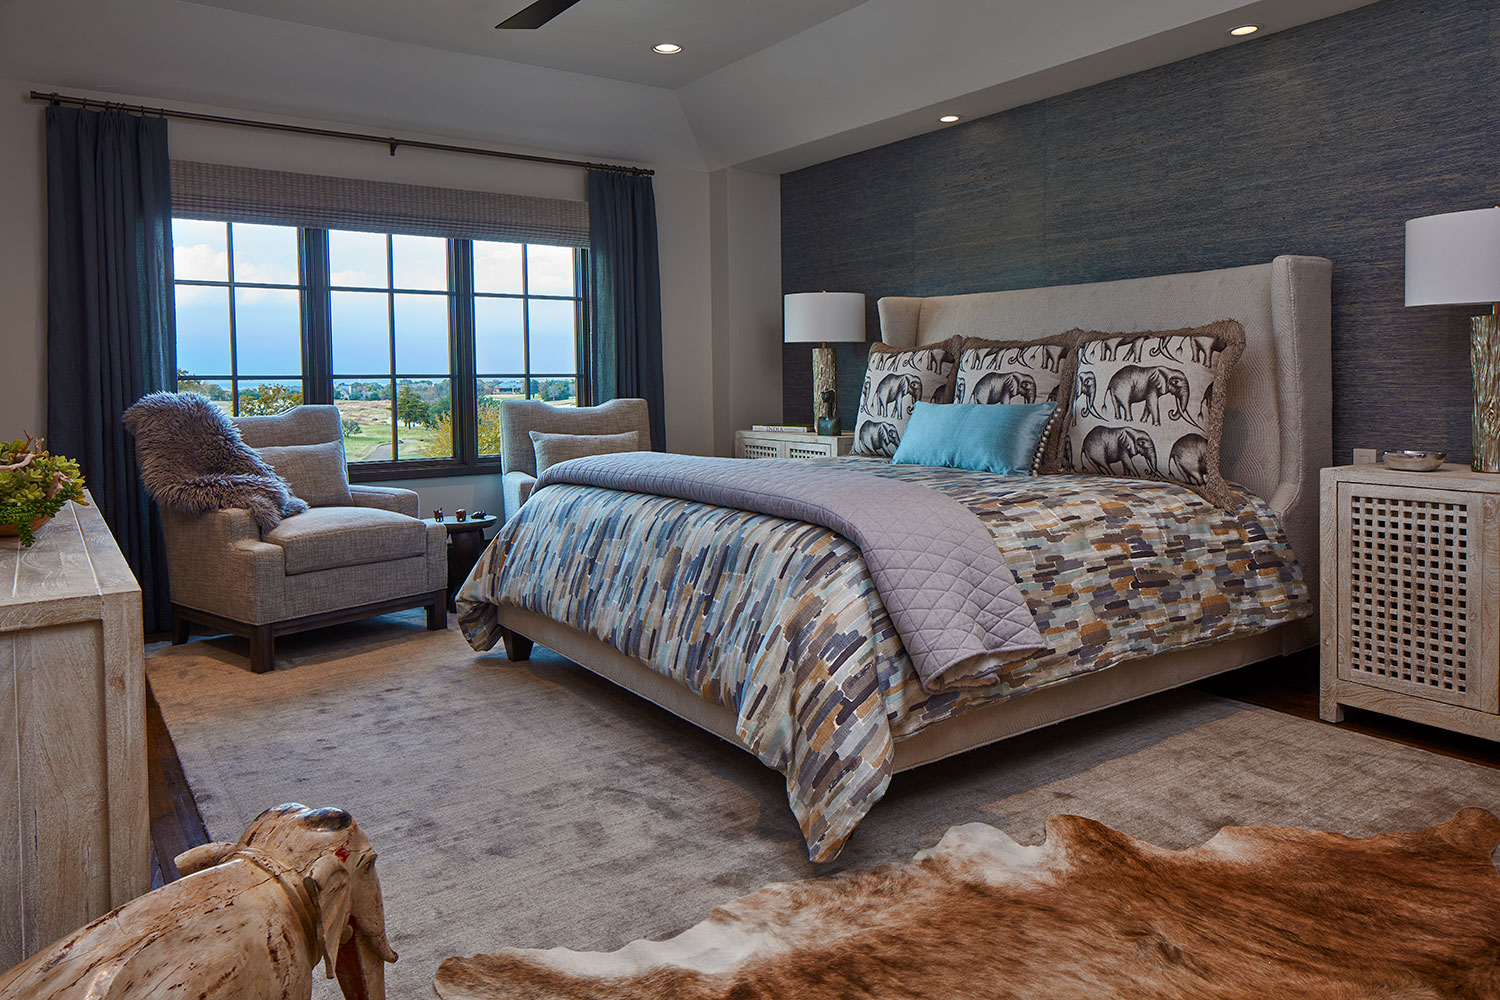 Blue and Beige Bedroom with Cow Hide Rug and Elephant Accents